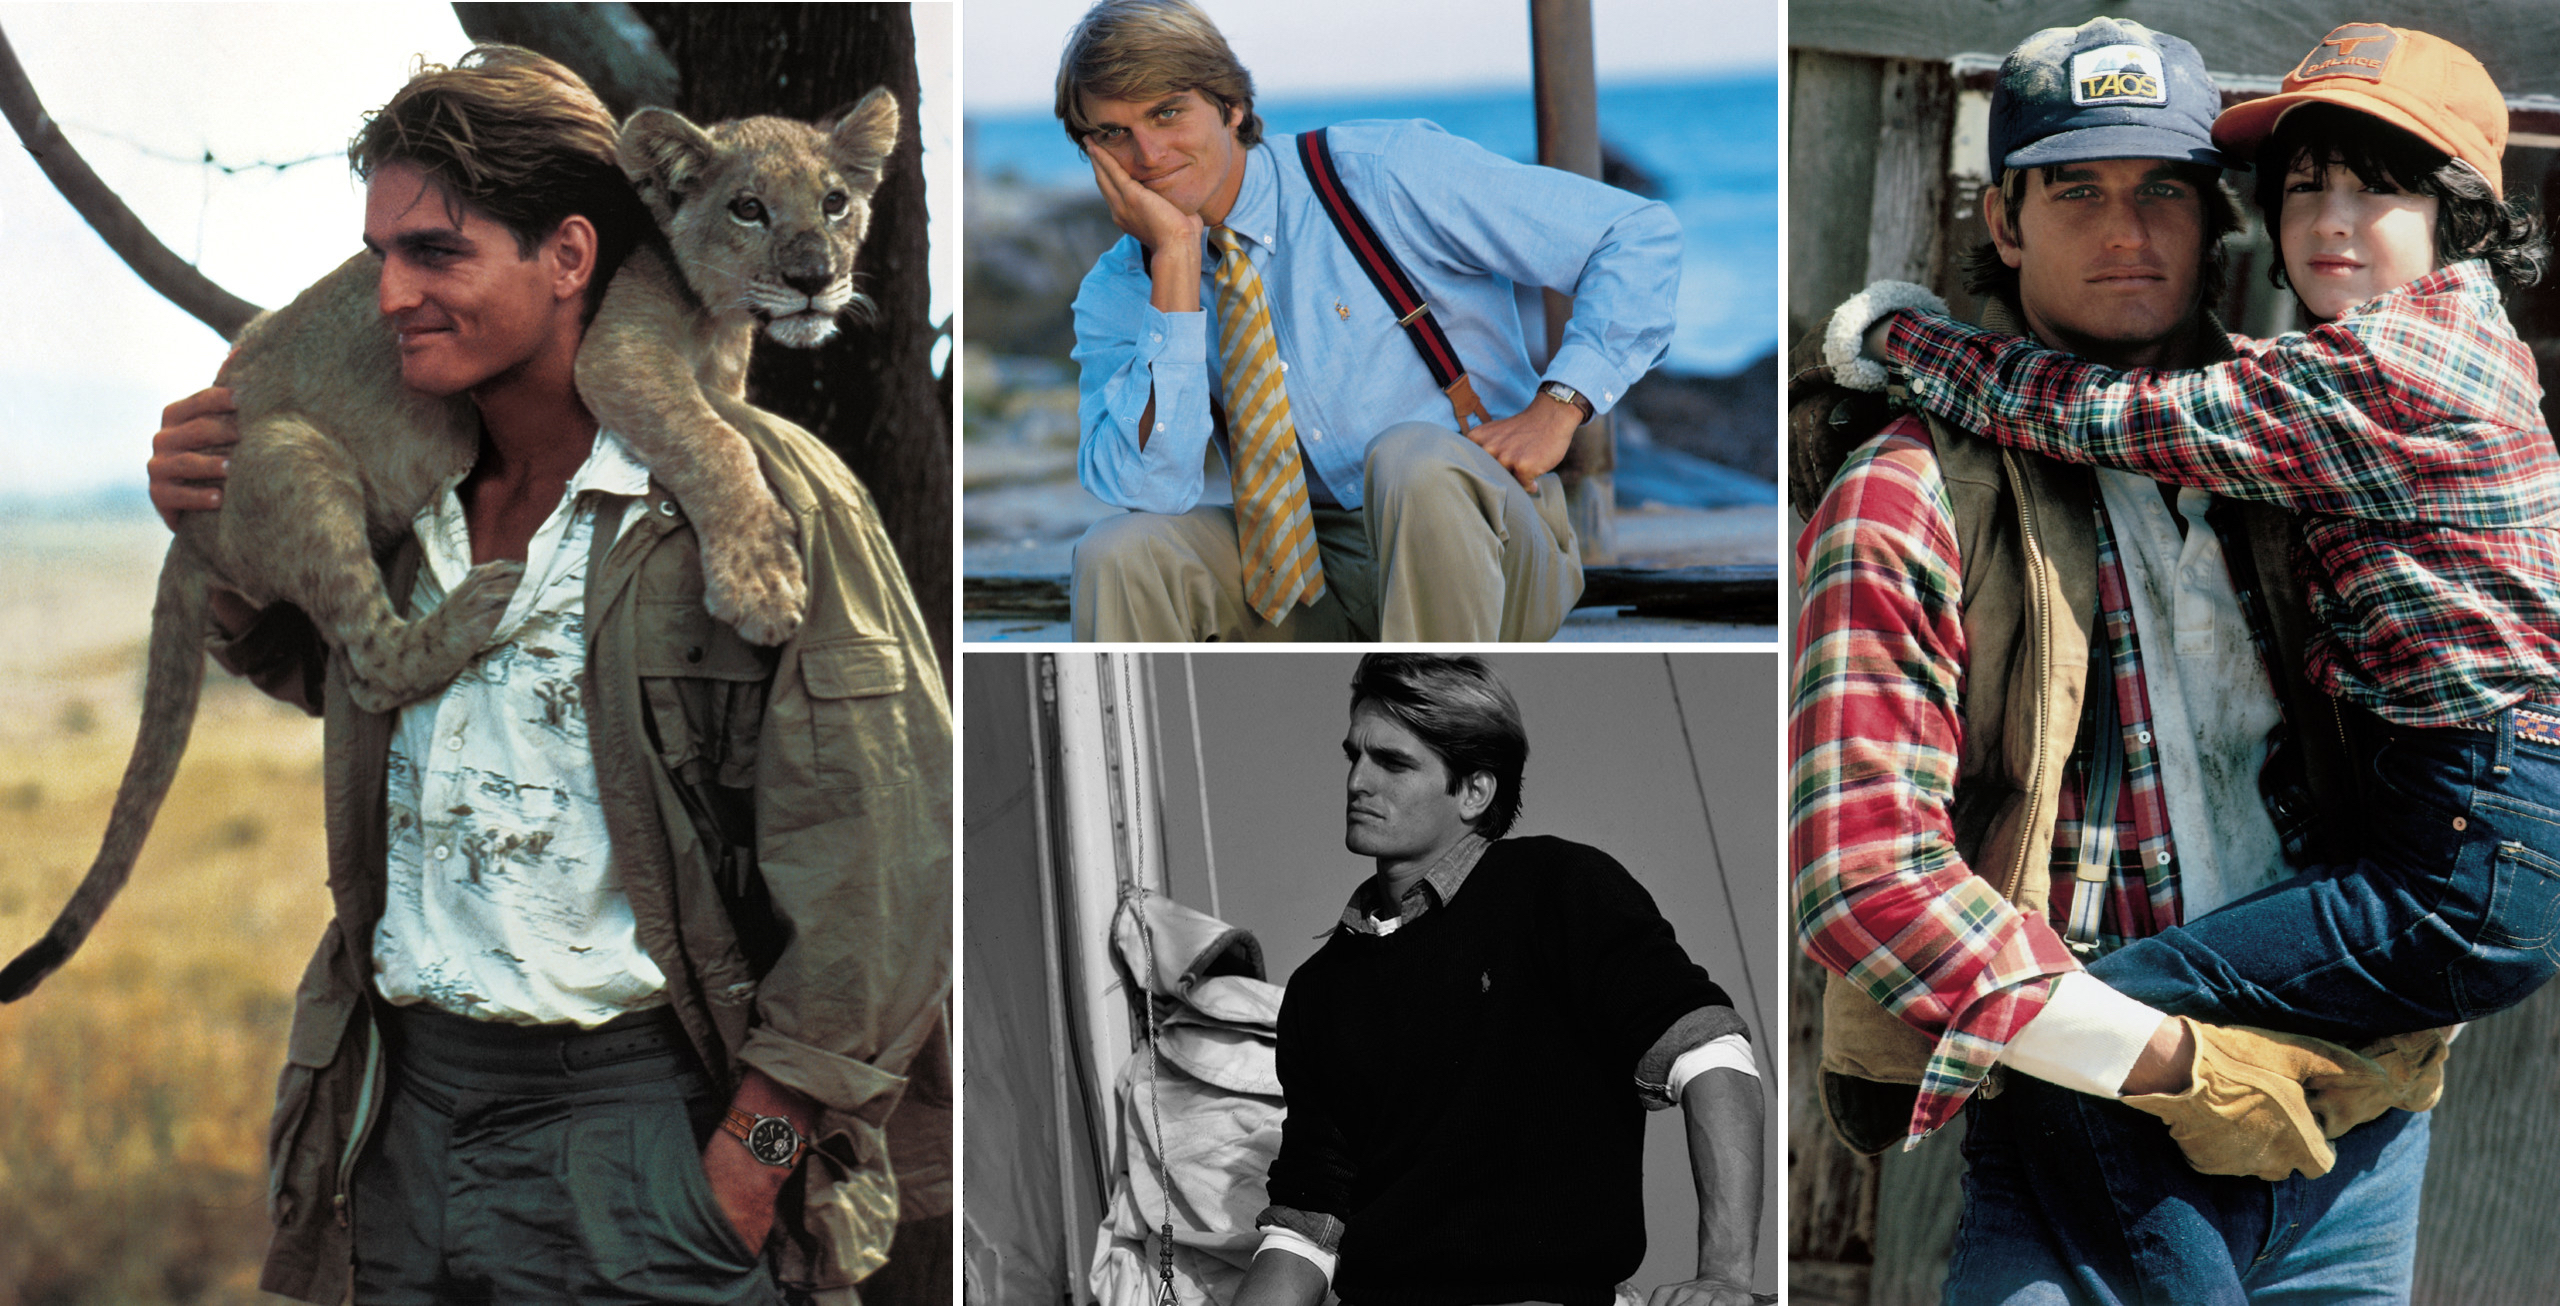 Kerbox through the years in some of his most iconic Ralph Lauren campaign images